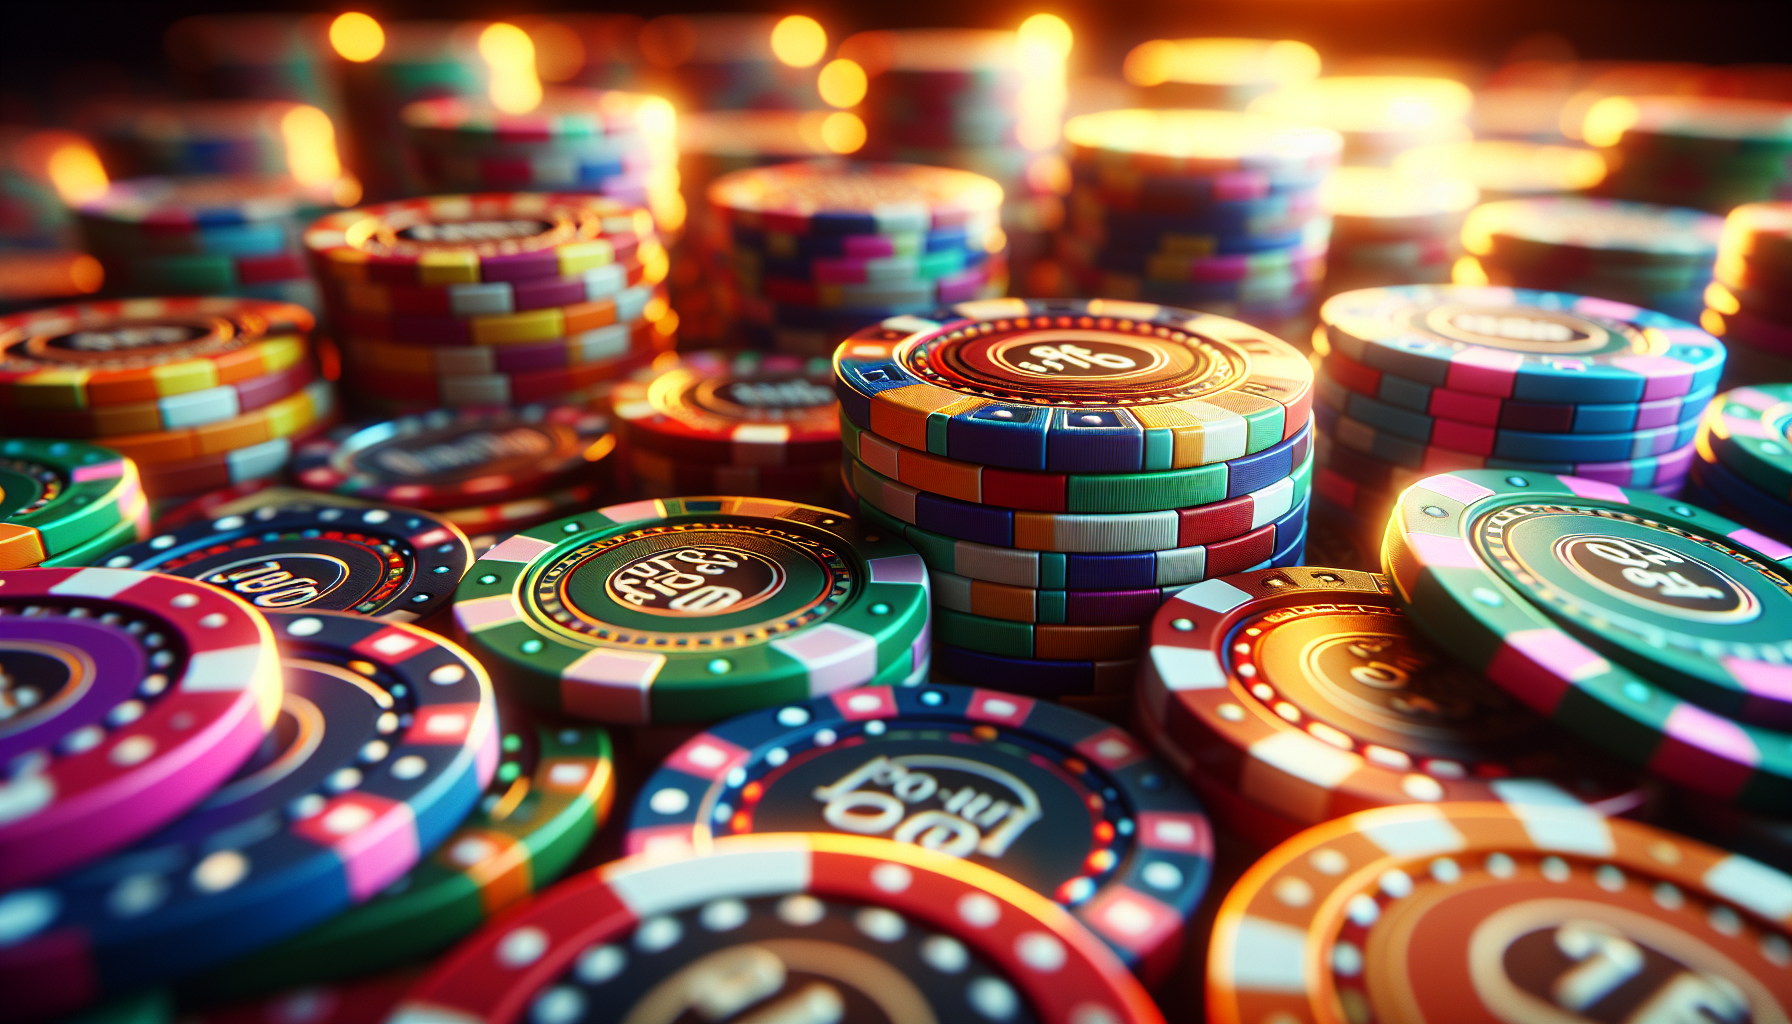 Can You Cash Out Free Play At Casino?